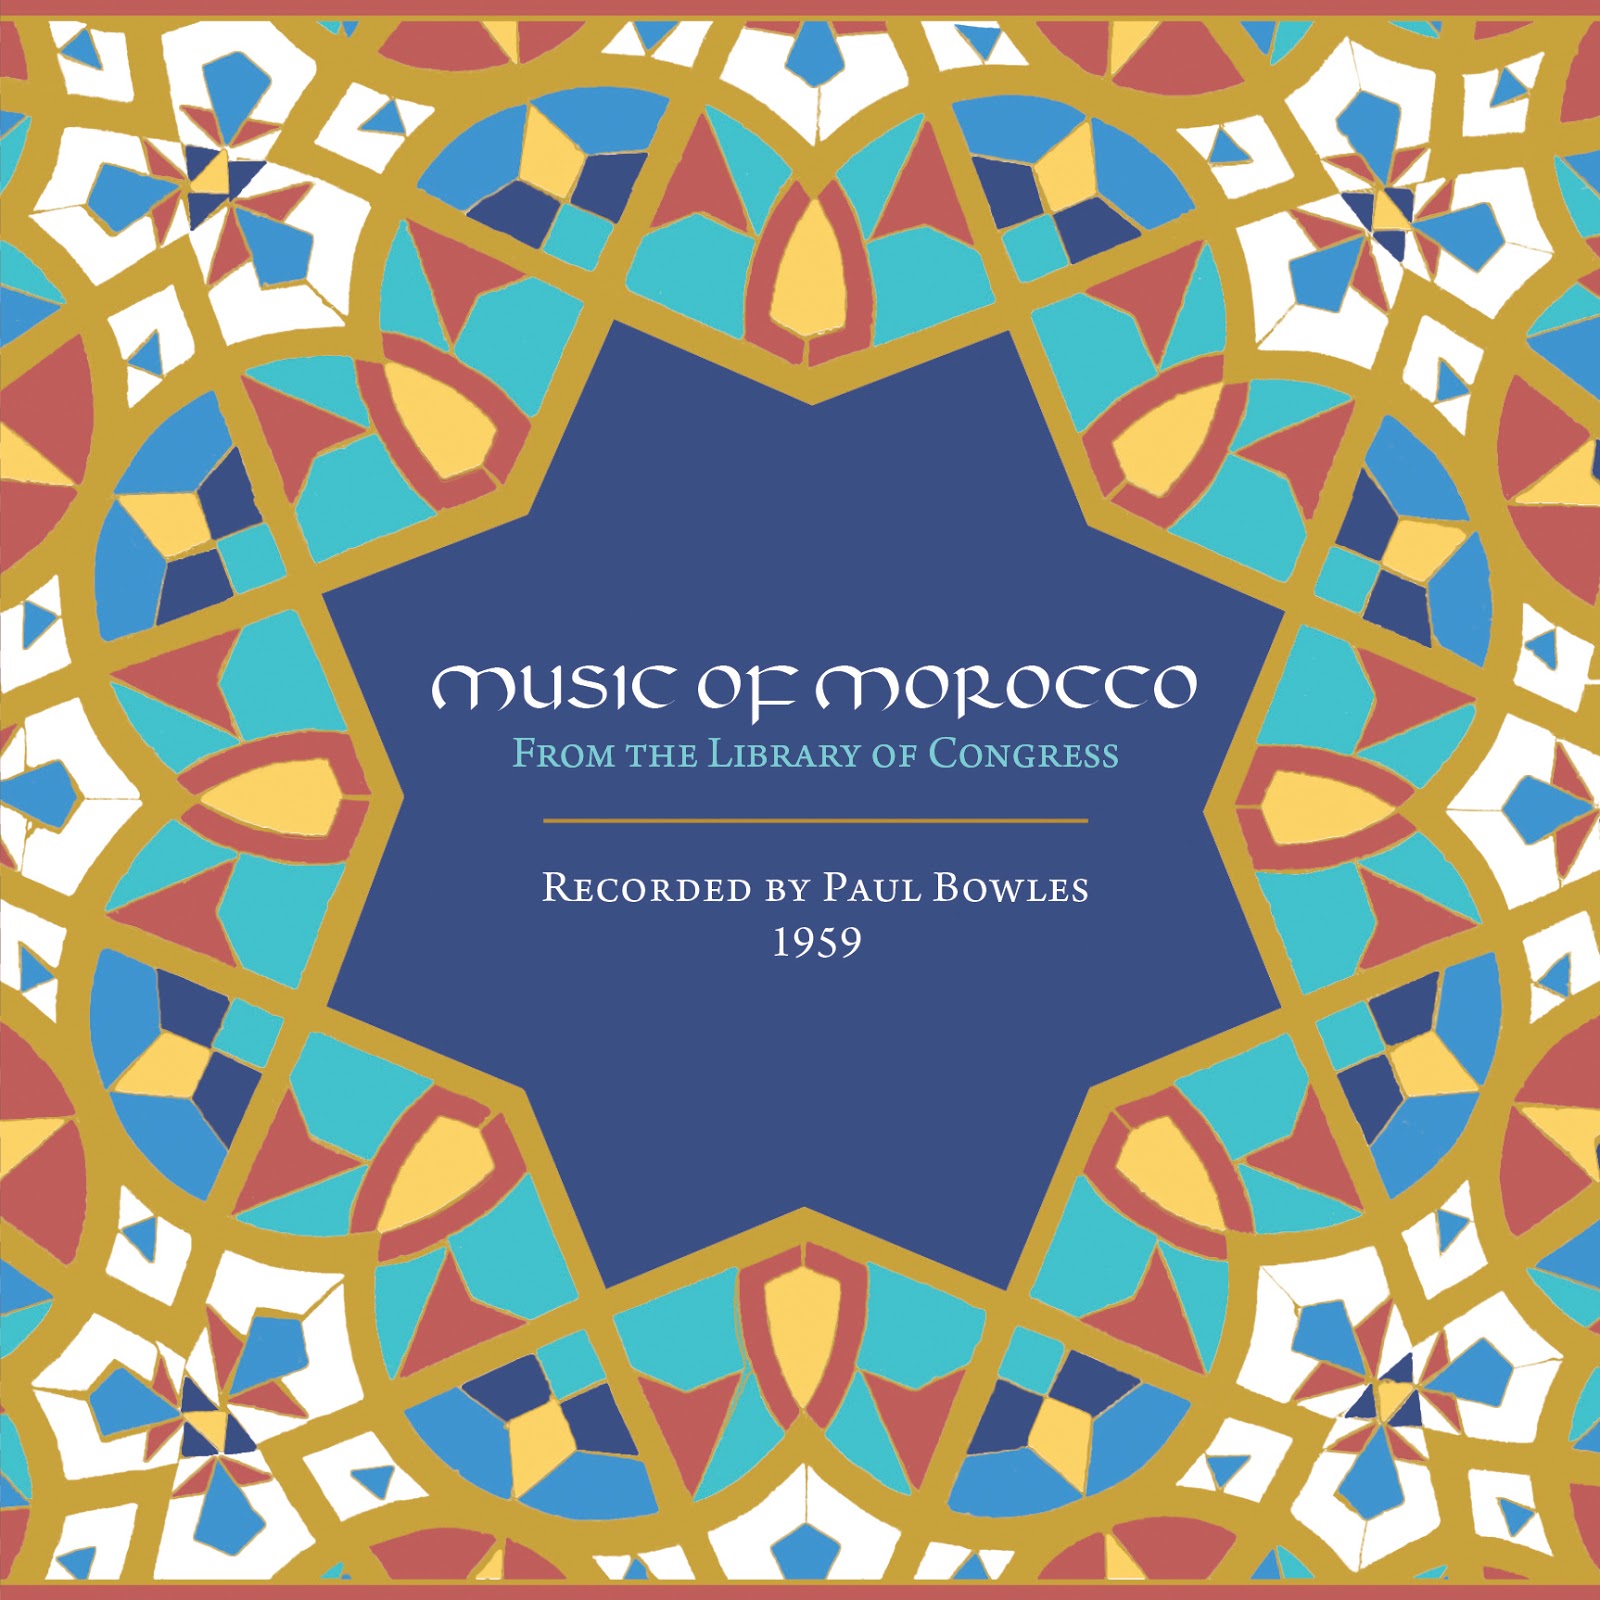 Music of Morocco from the Library of Congress